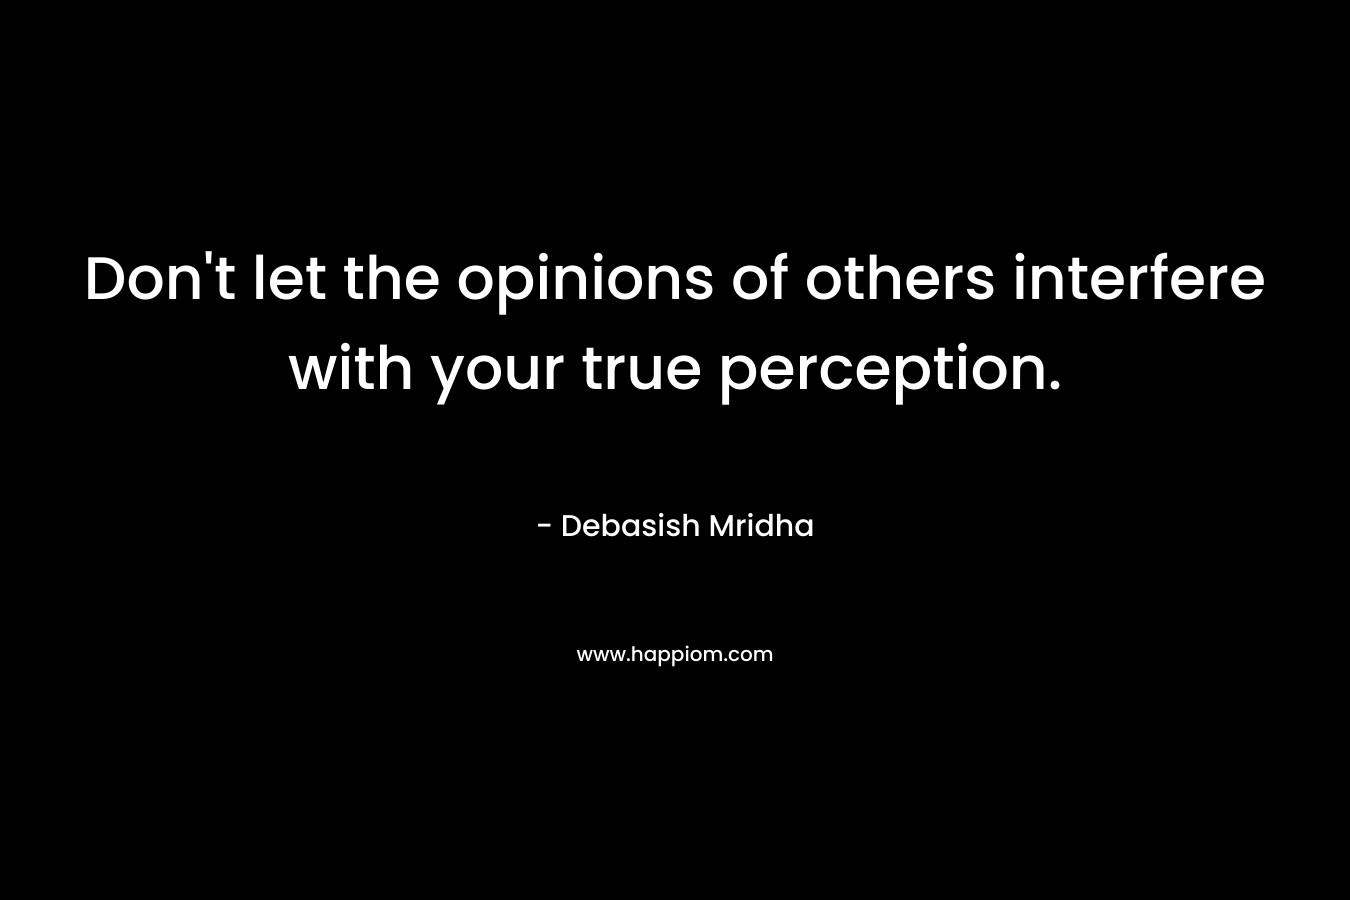 Don't let the opinions of others interfere with your true perception.